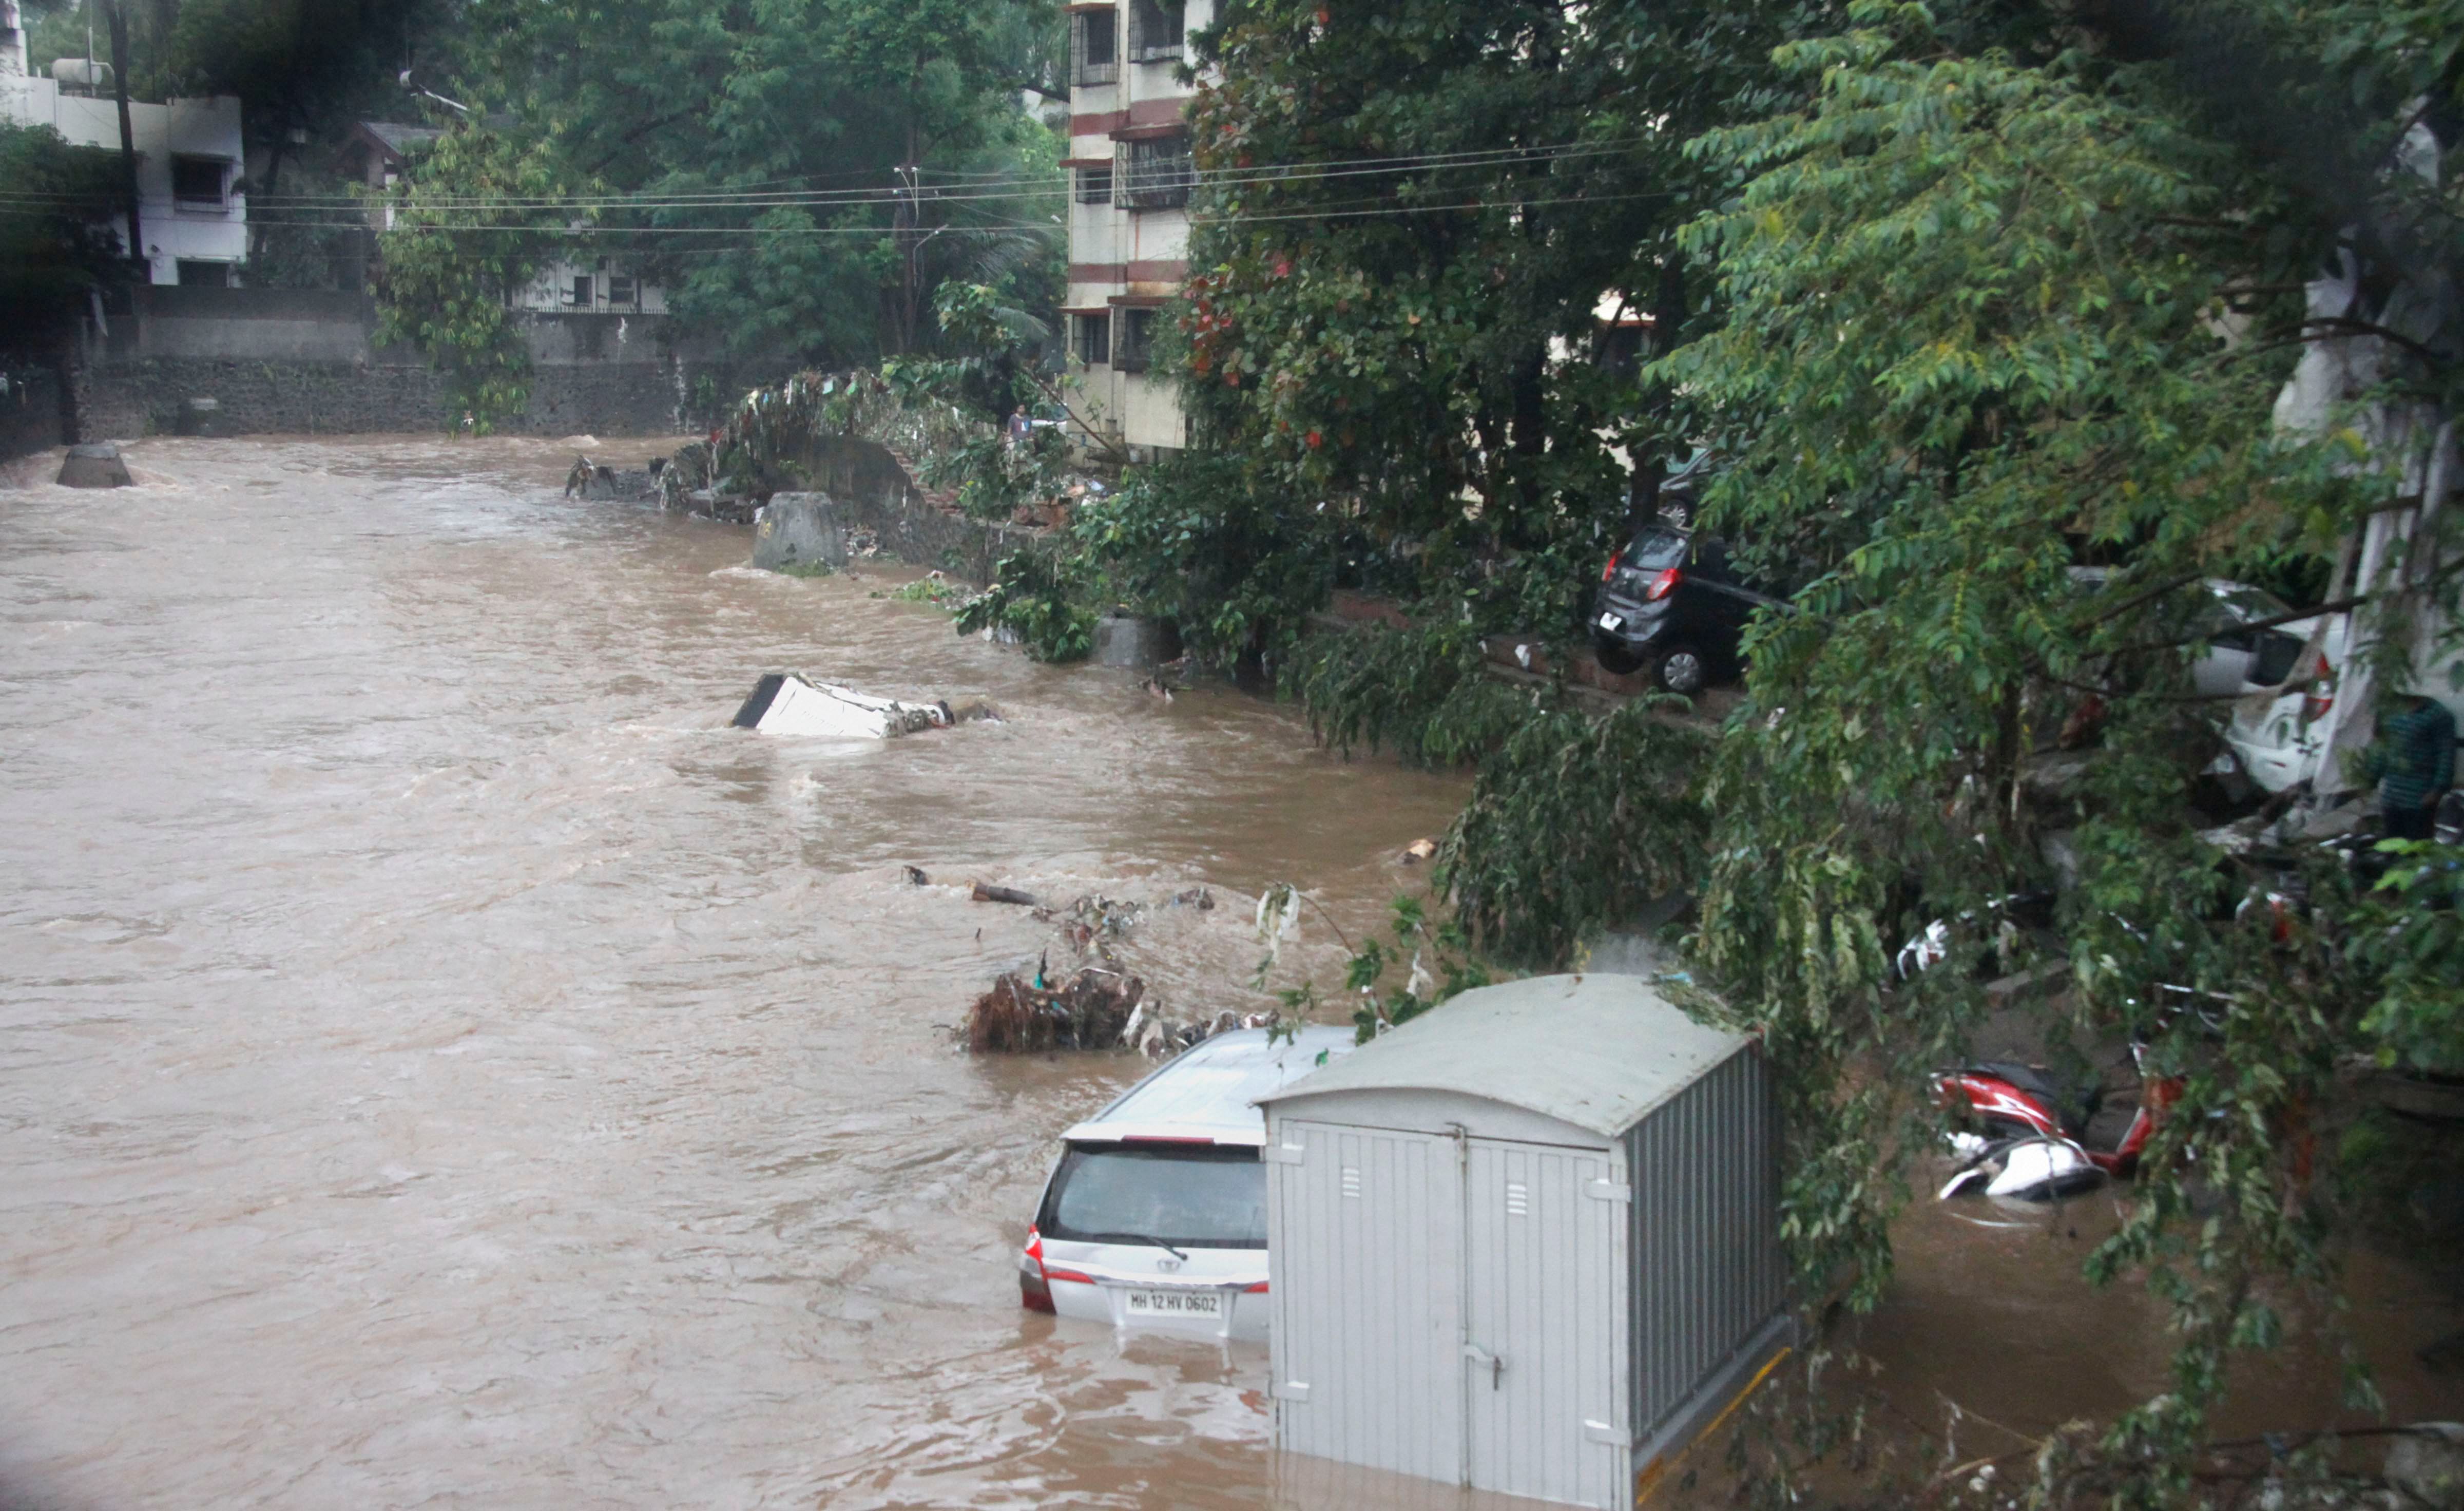 At least 12 people were killed in various incidents of flooding and wall collapse after heavy rains battered Pune (PTI Photo)